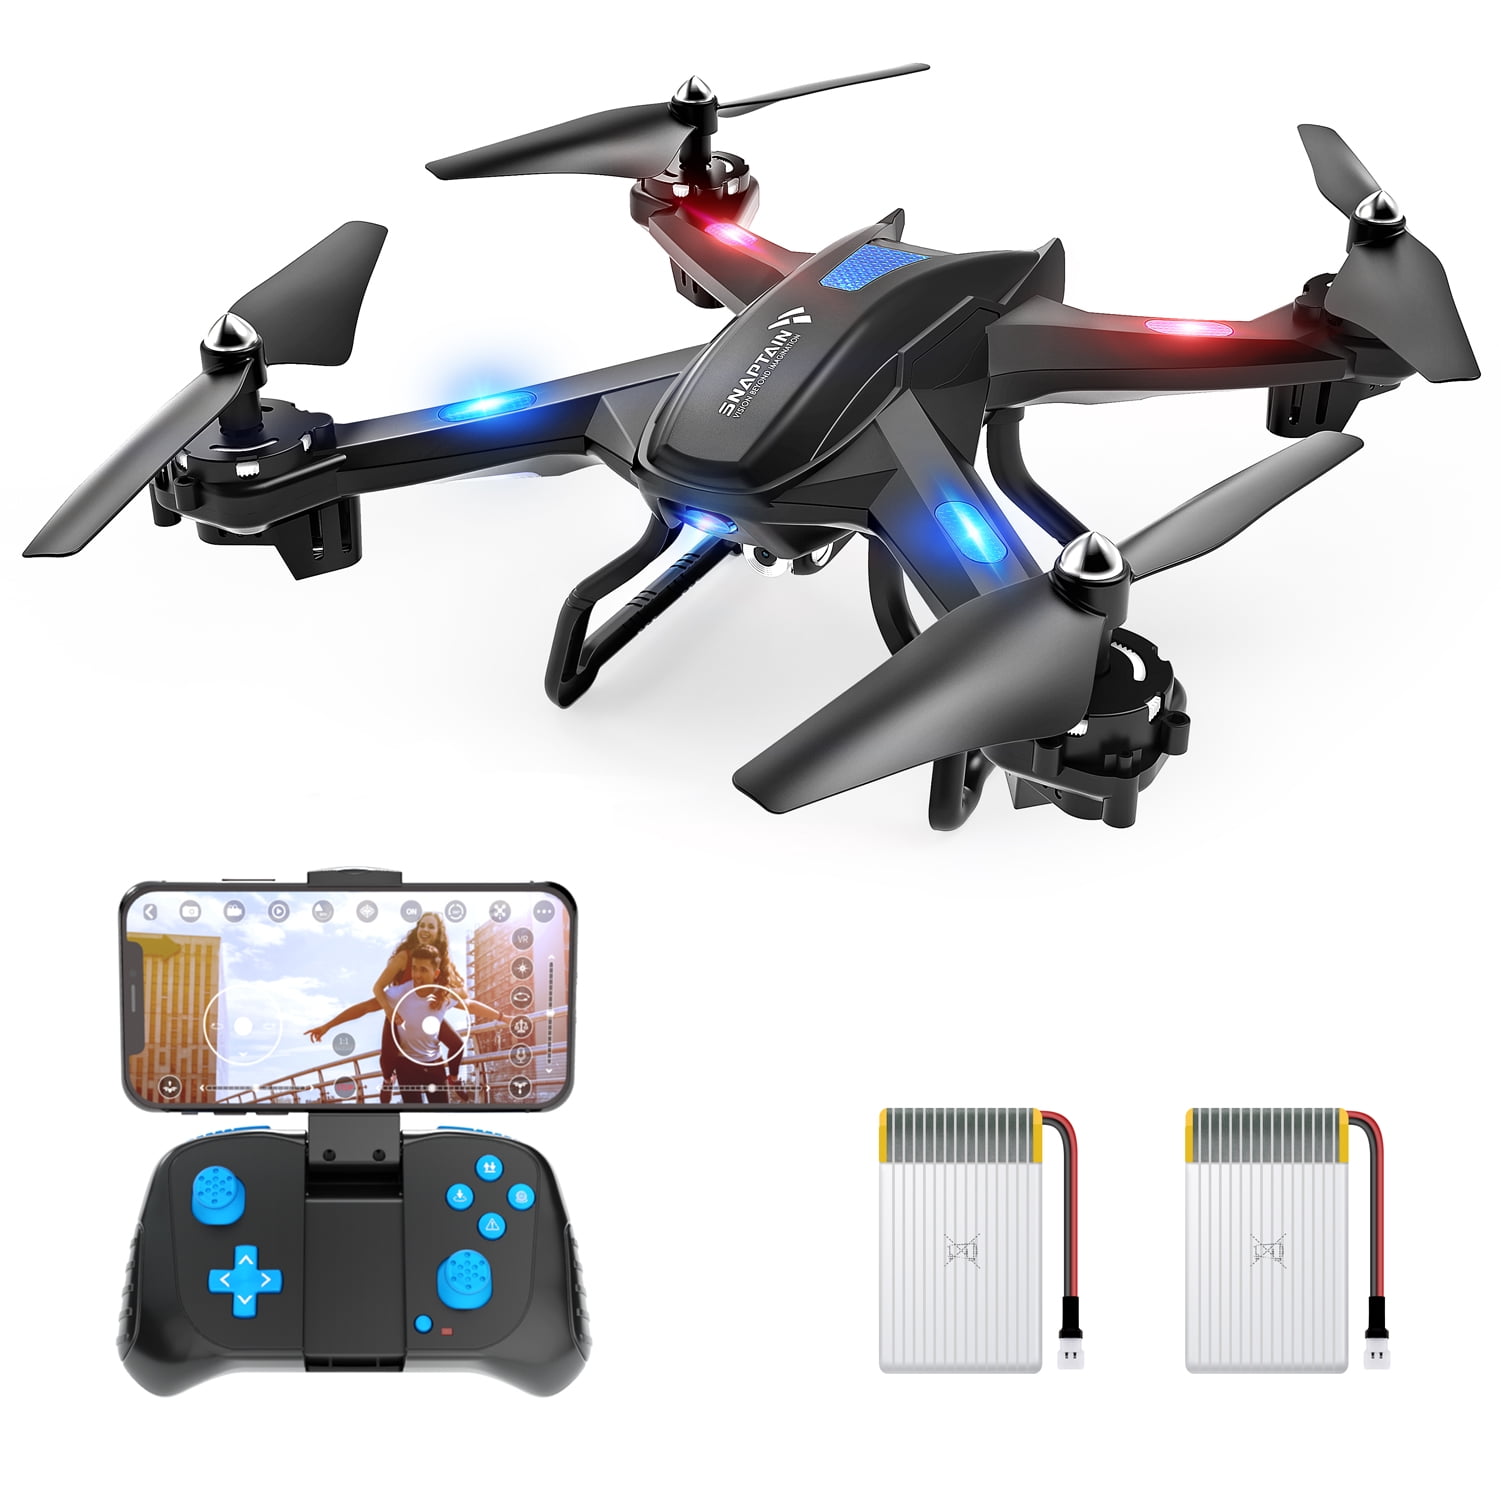 SNAPTAIN S5C WiFi FPV Drone with 720P HD Voice Control, Gesture Control RC Quadcopter for Beginners with Altitude Hold, RTF One Key Take Off/Landing, Compatible w/VR Headset Walmart.com